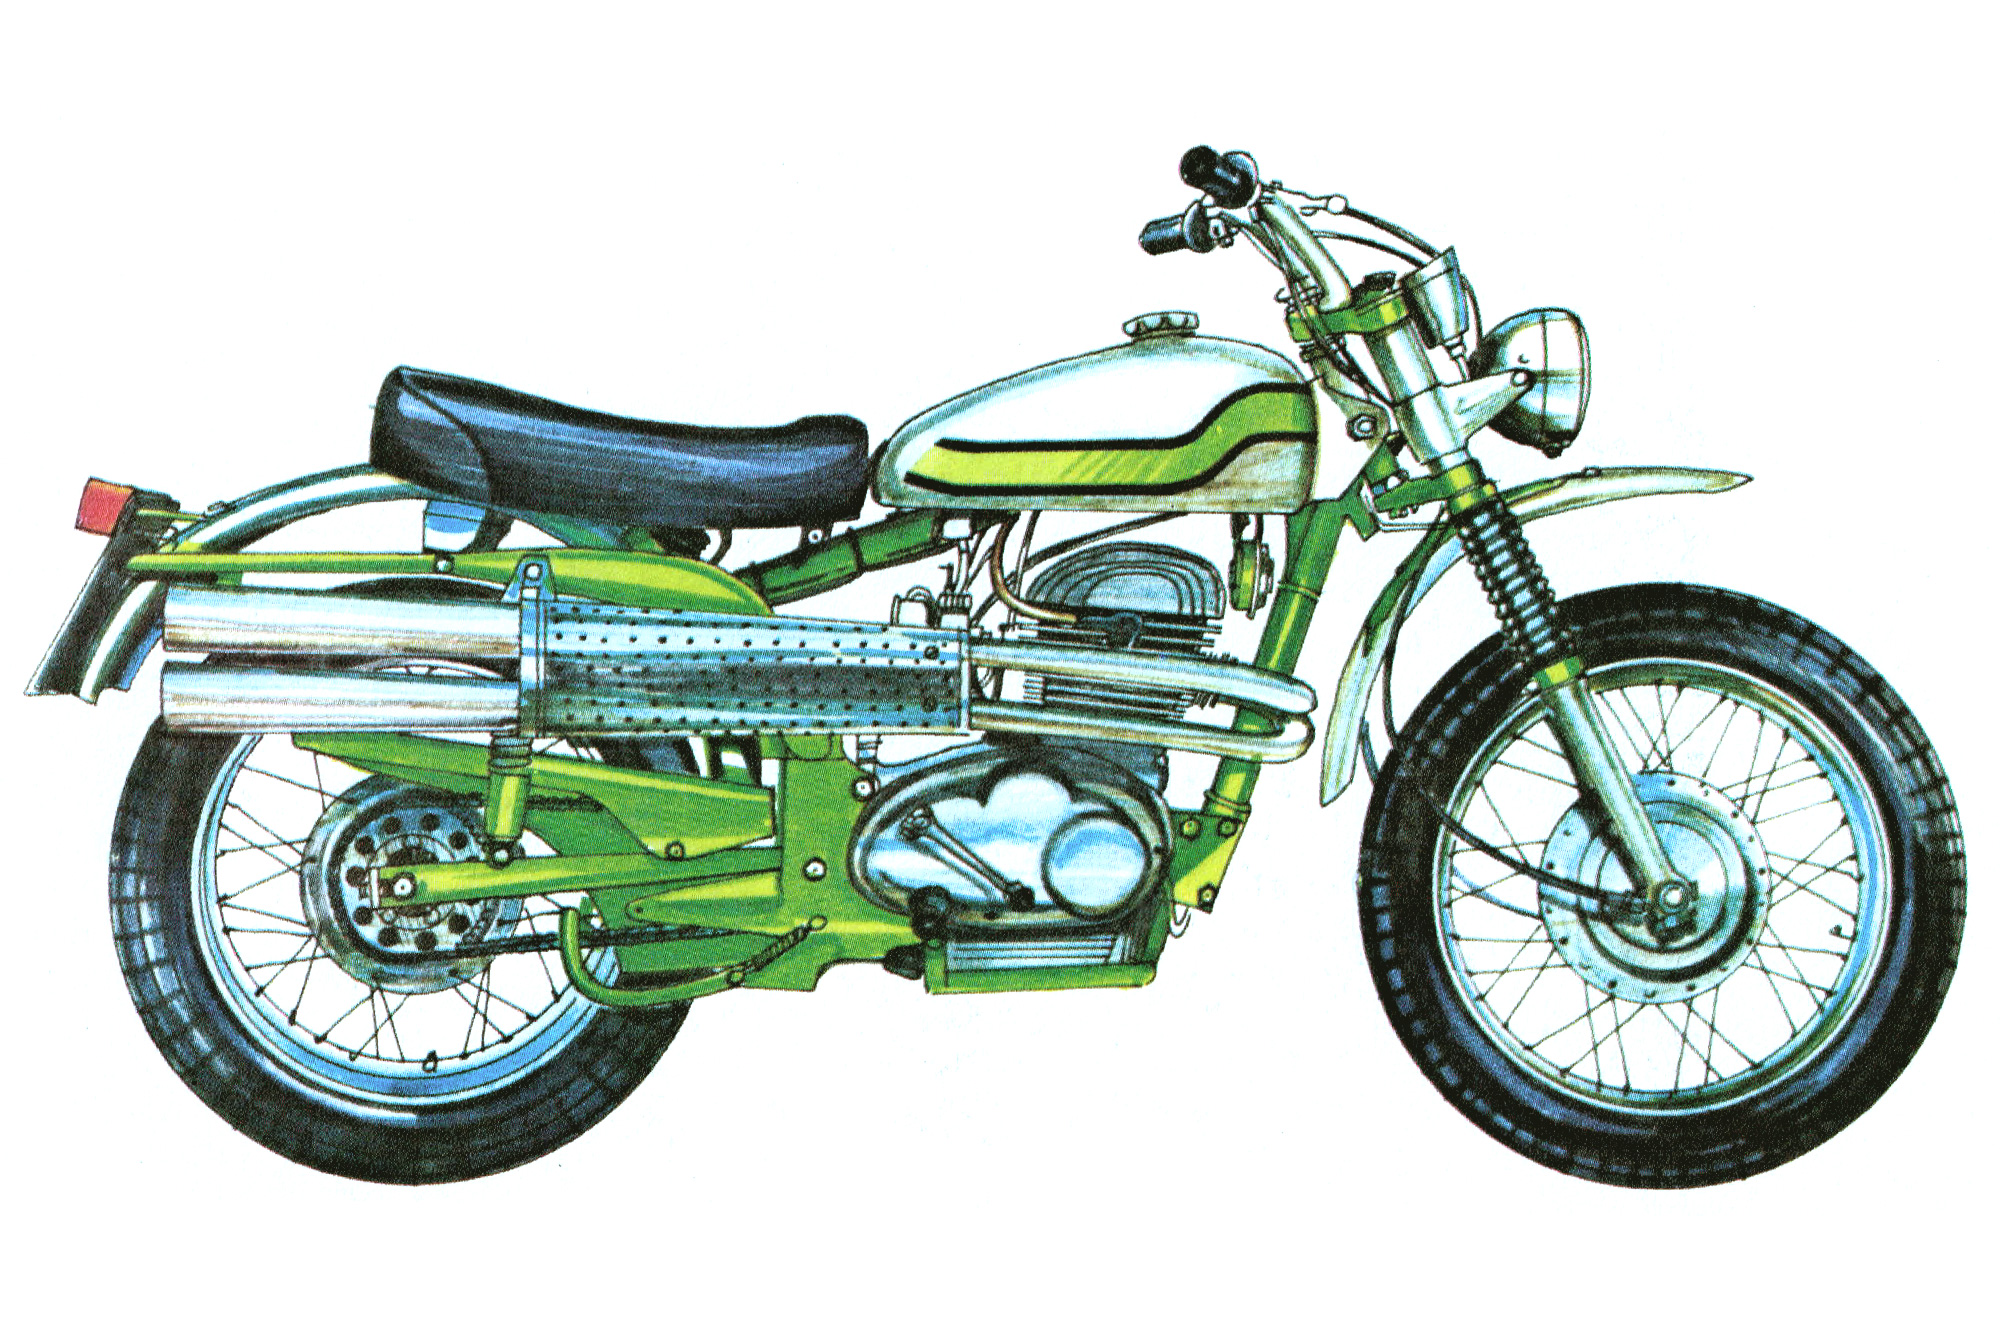 Illustration of a 1970s Aussie enduro motorcycle with scrambler pipes